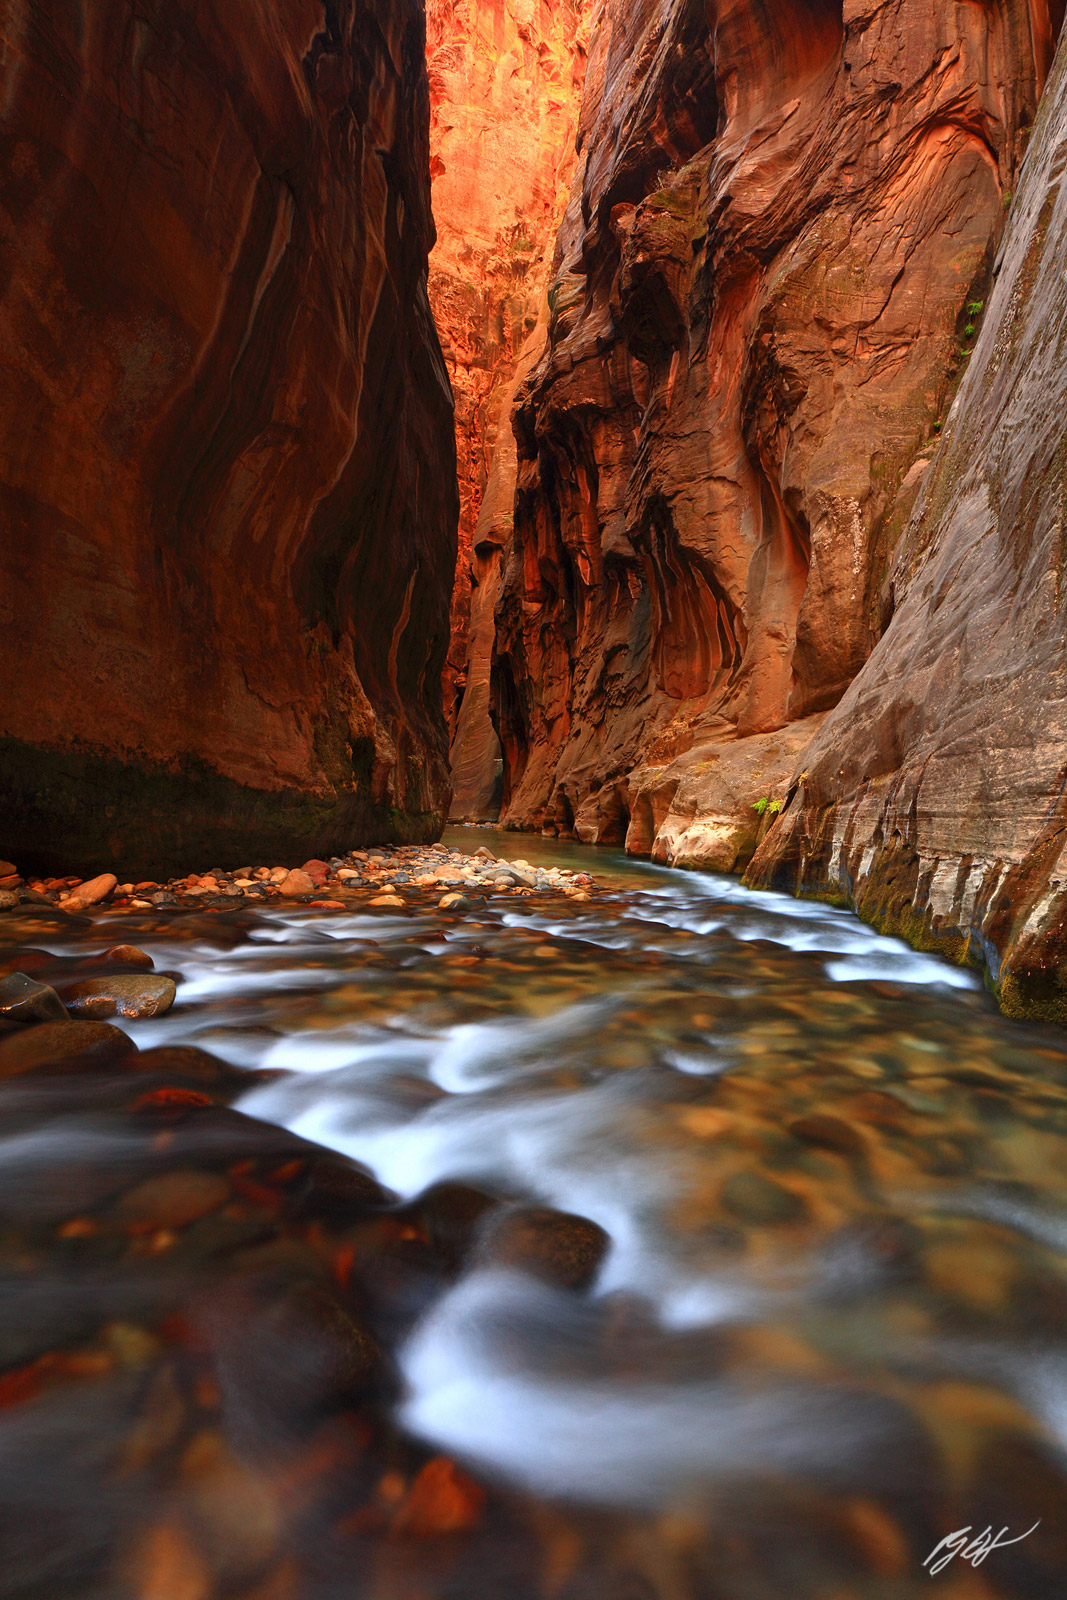 The Virgin River Running Through the Narrows in Zion National Park in Utah